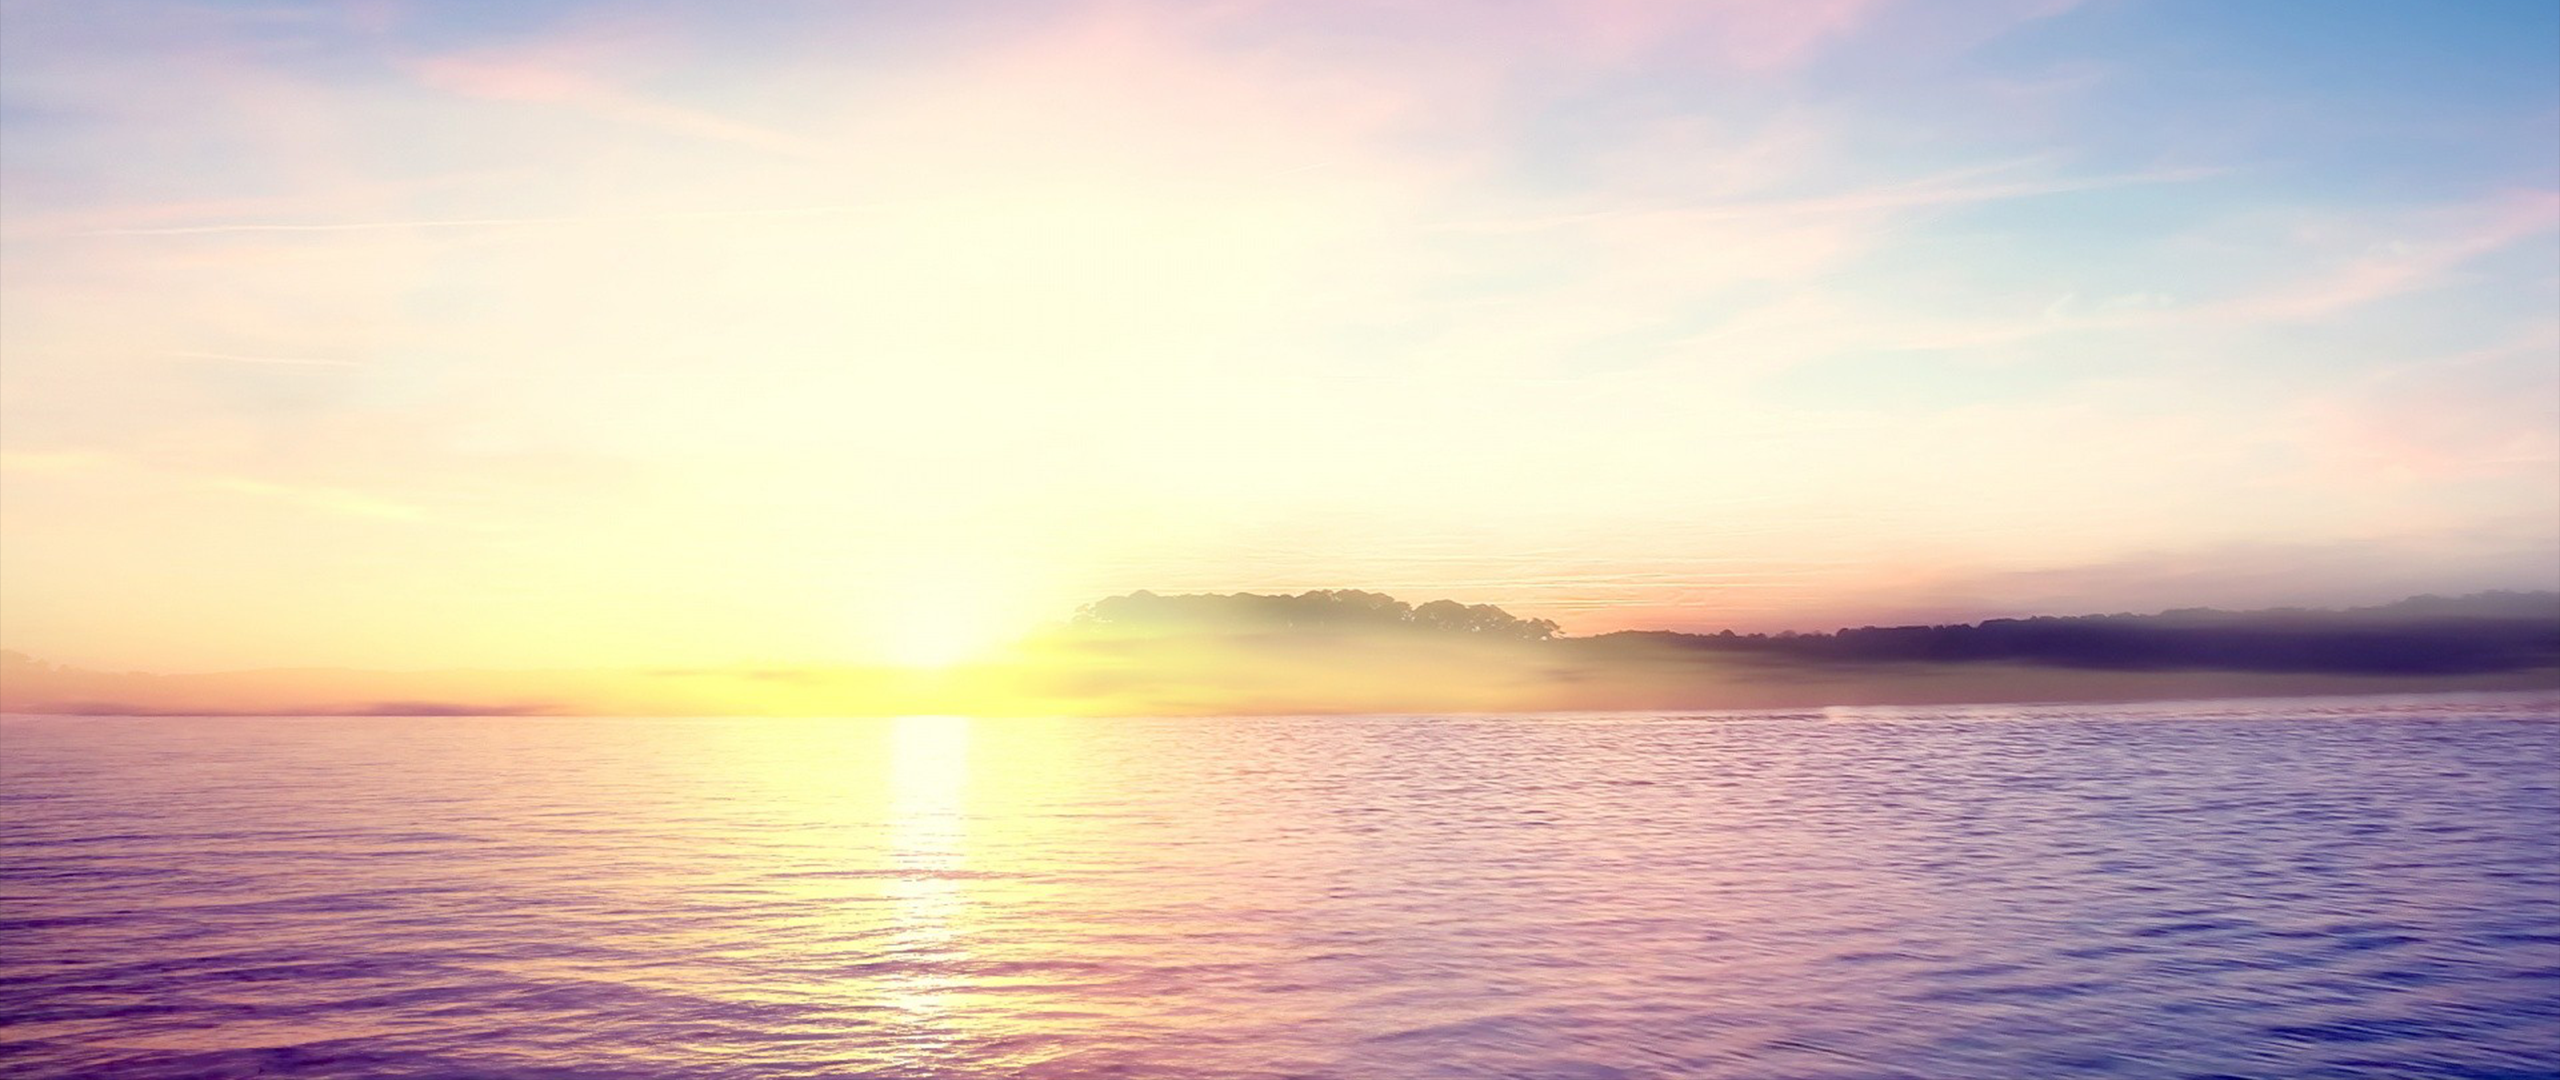 General 2560x1080 ultrawide photography nature sea water sunrise morning